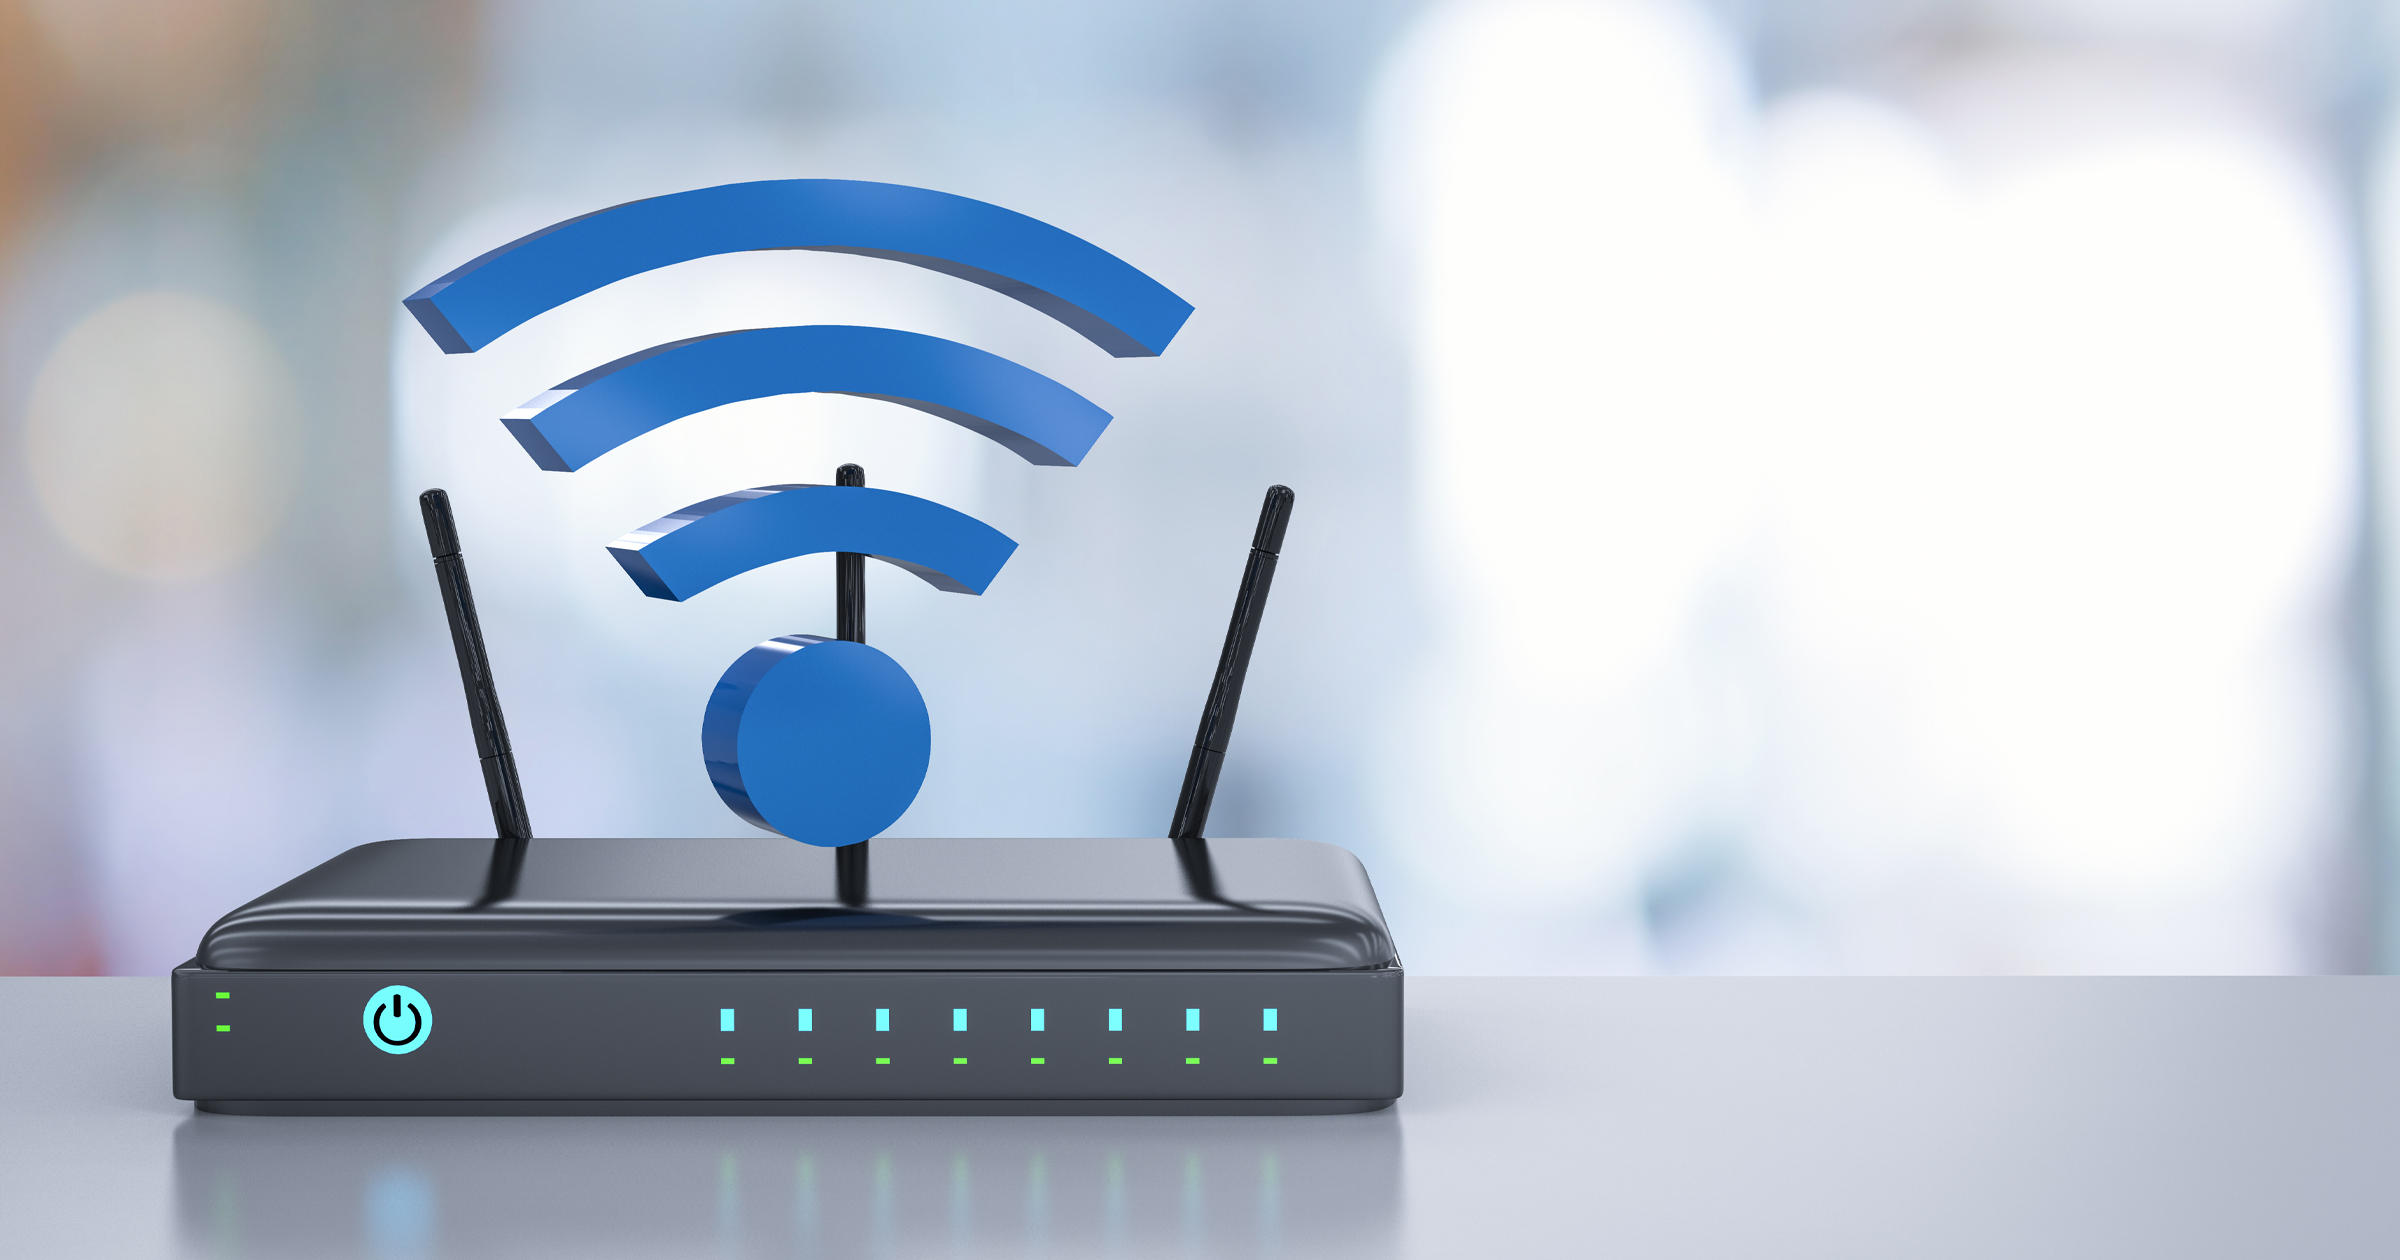 Separate Wi-Fi SSIDs to the 2.4 GHz and the 5 GHz